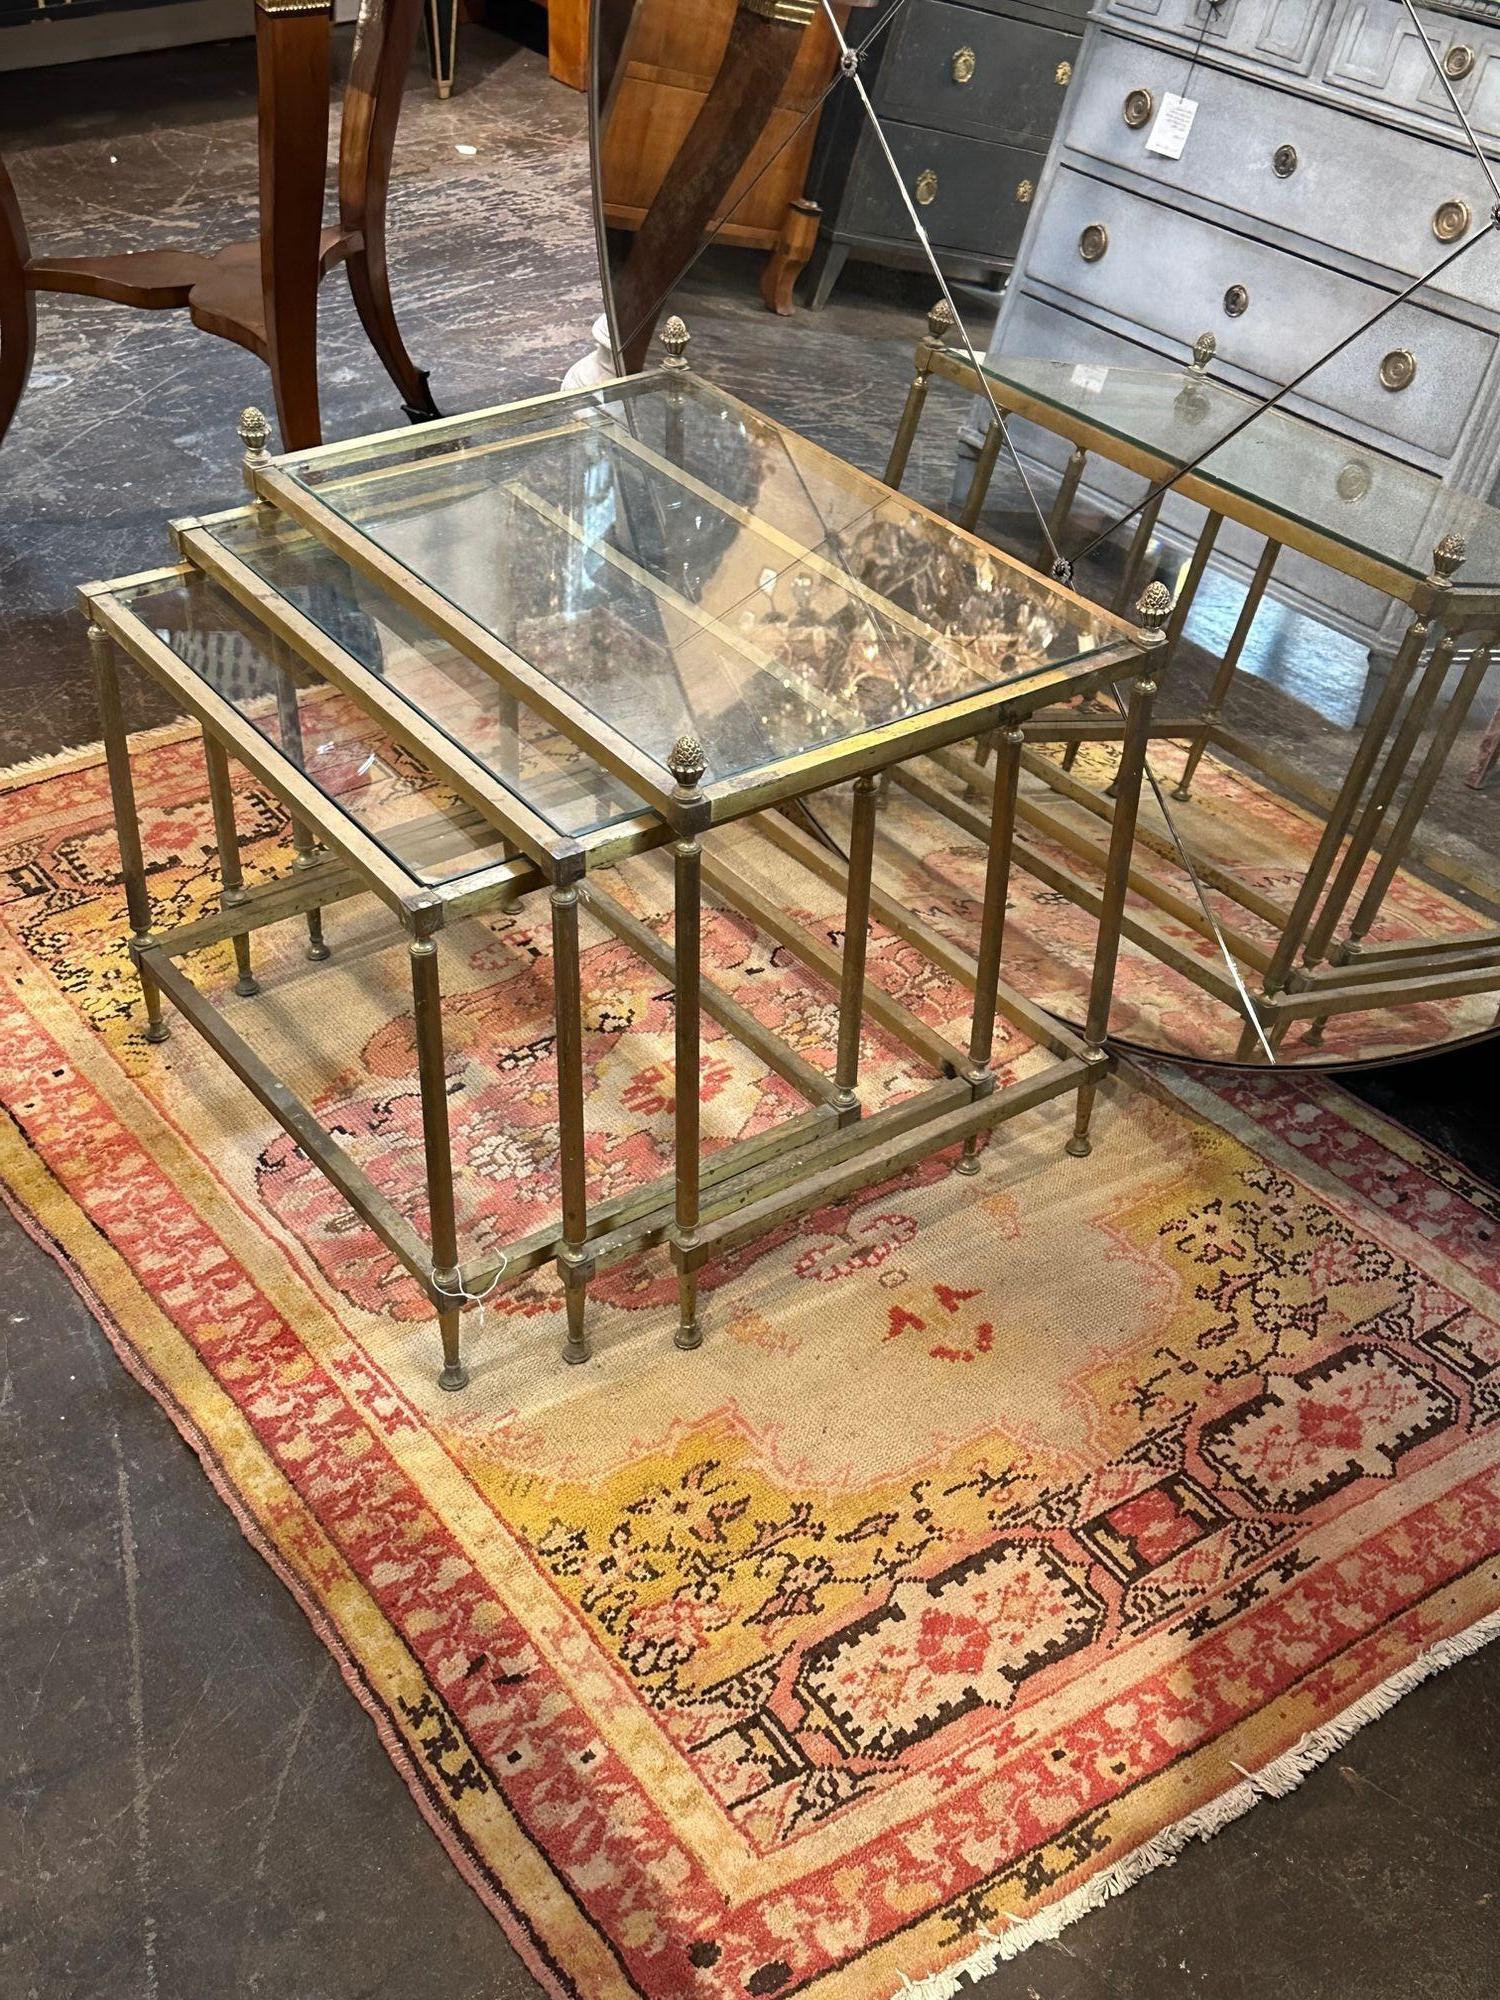 Lovely set of 3 vintage Italian nesting tables. Creates a nice traditional look. Note: These tables are sold as is.